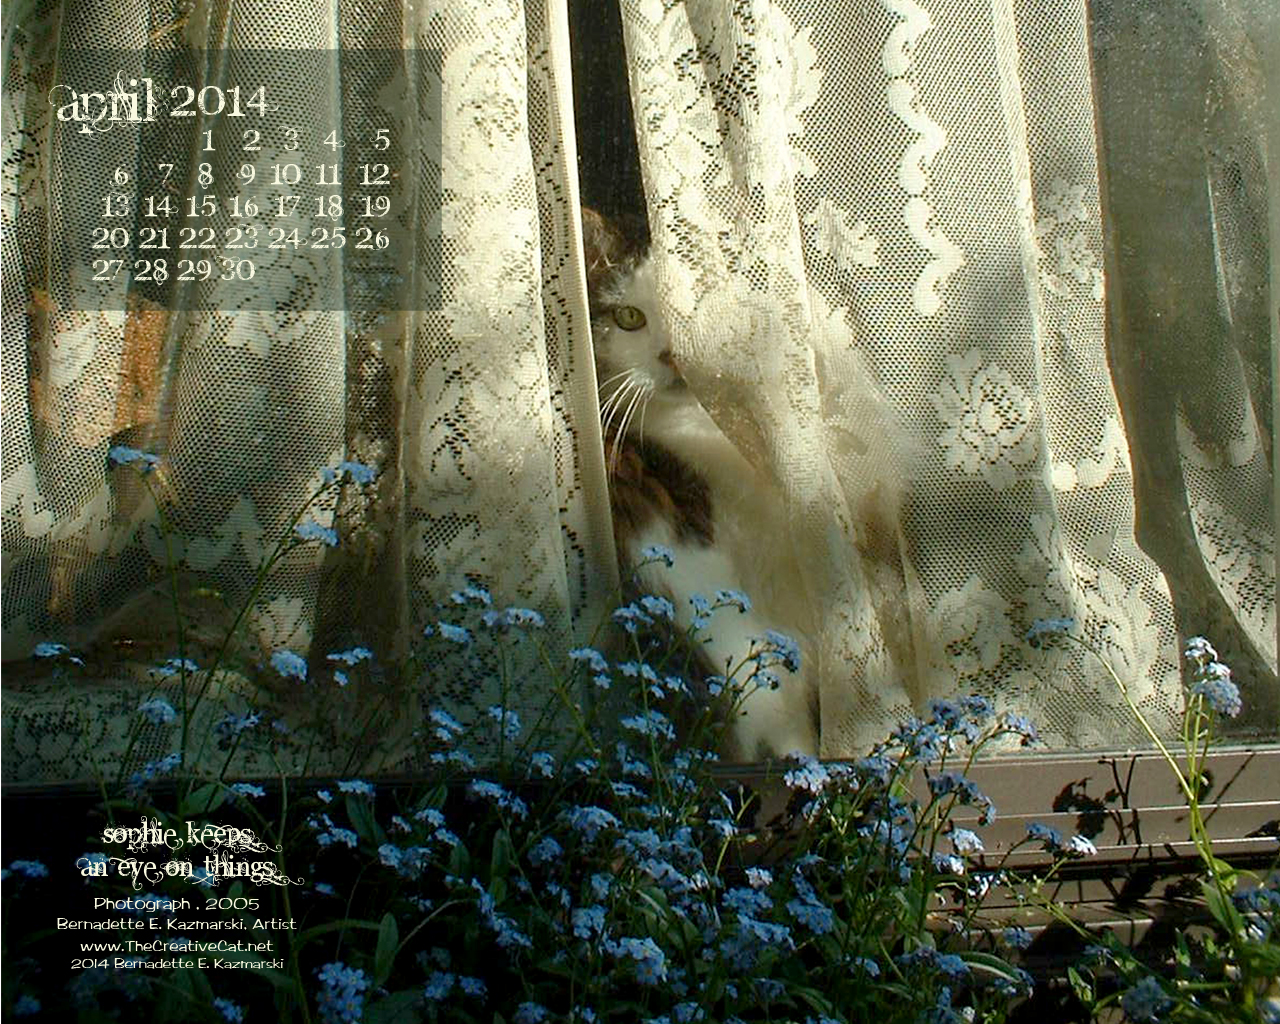 "Sophie Keeps an Eye on Things" 1280 x 1024 for square and laptop monotors desktop calendar wallpaper